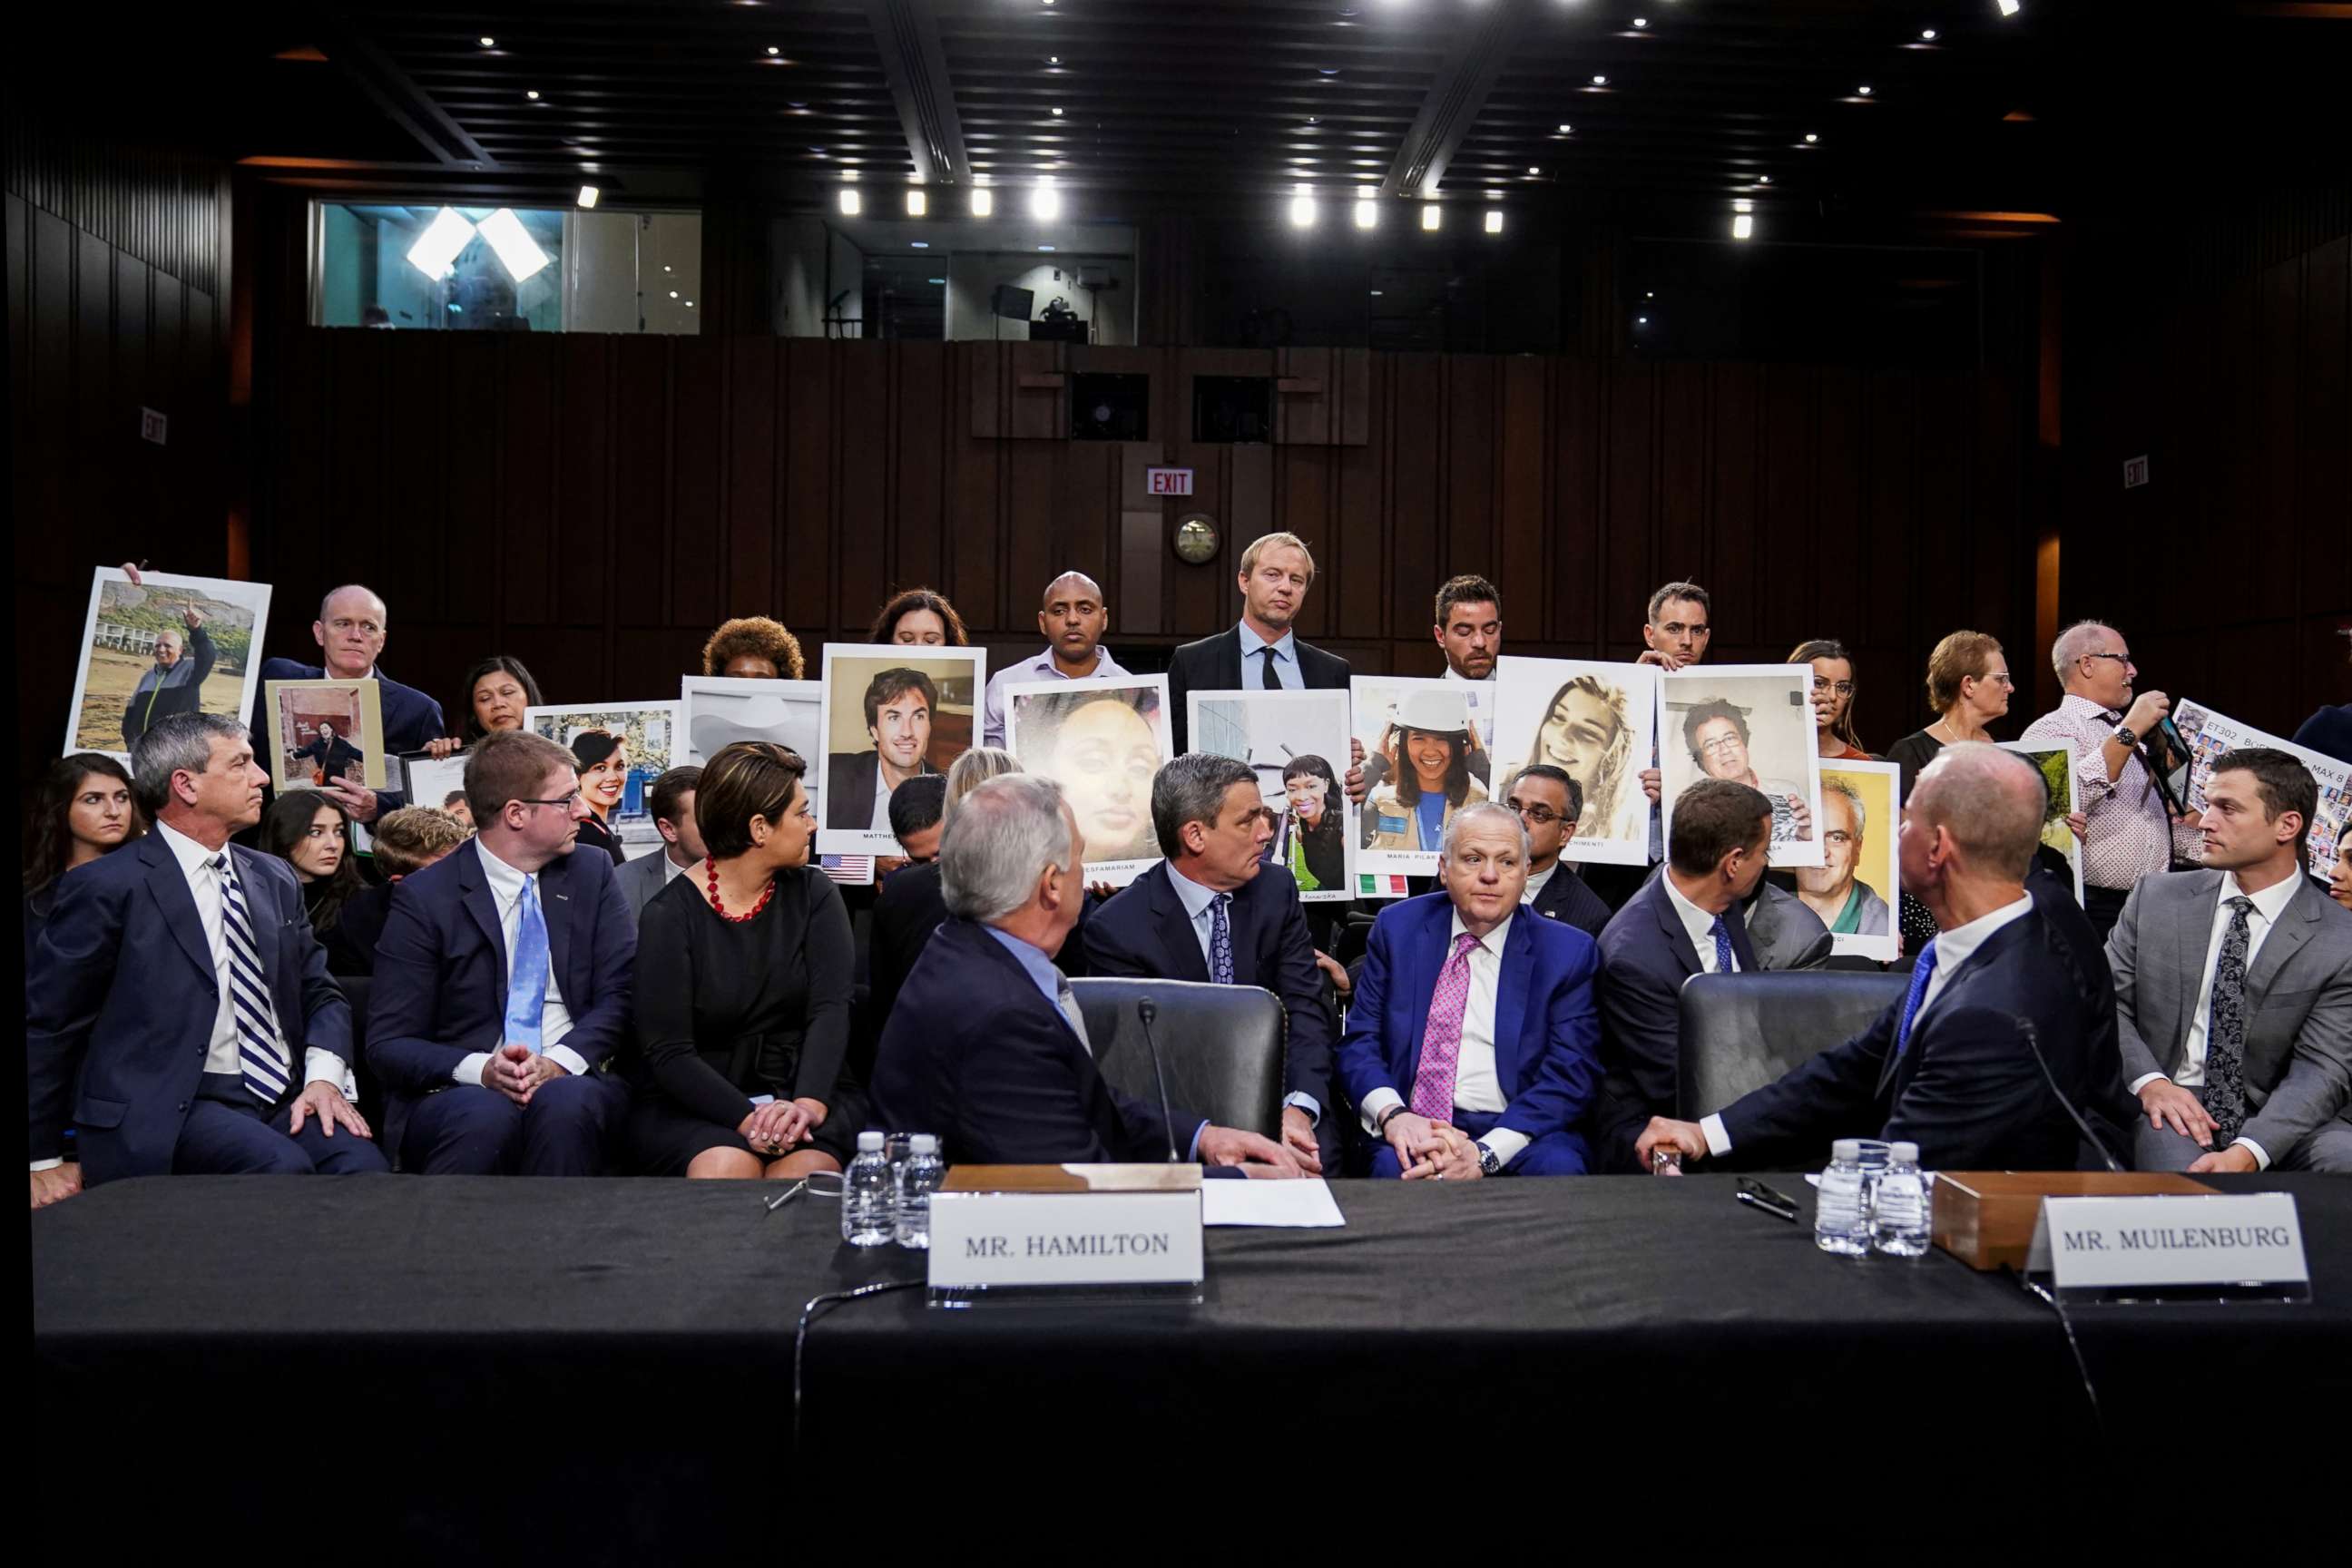 PHOTO: Boeing's Vice President and Chief Engineer John Hamilton, and Chief Executive Dennis Muilenburg, look at family members holding photos of 737 Max crash victims during a hearing on aviation safety on Capitol Hill, Oct. 29, 2019, in Washington, D.C.